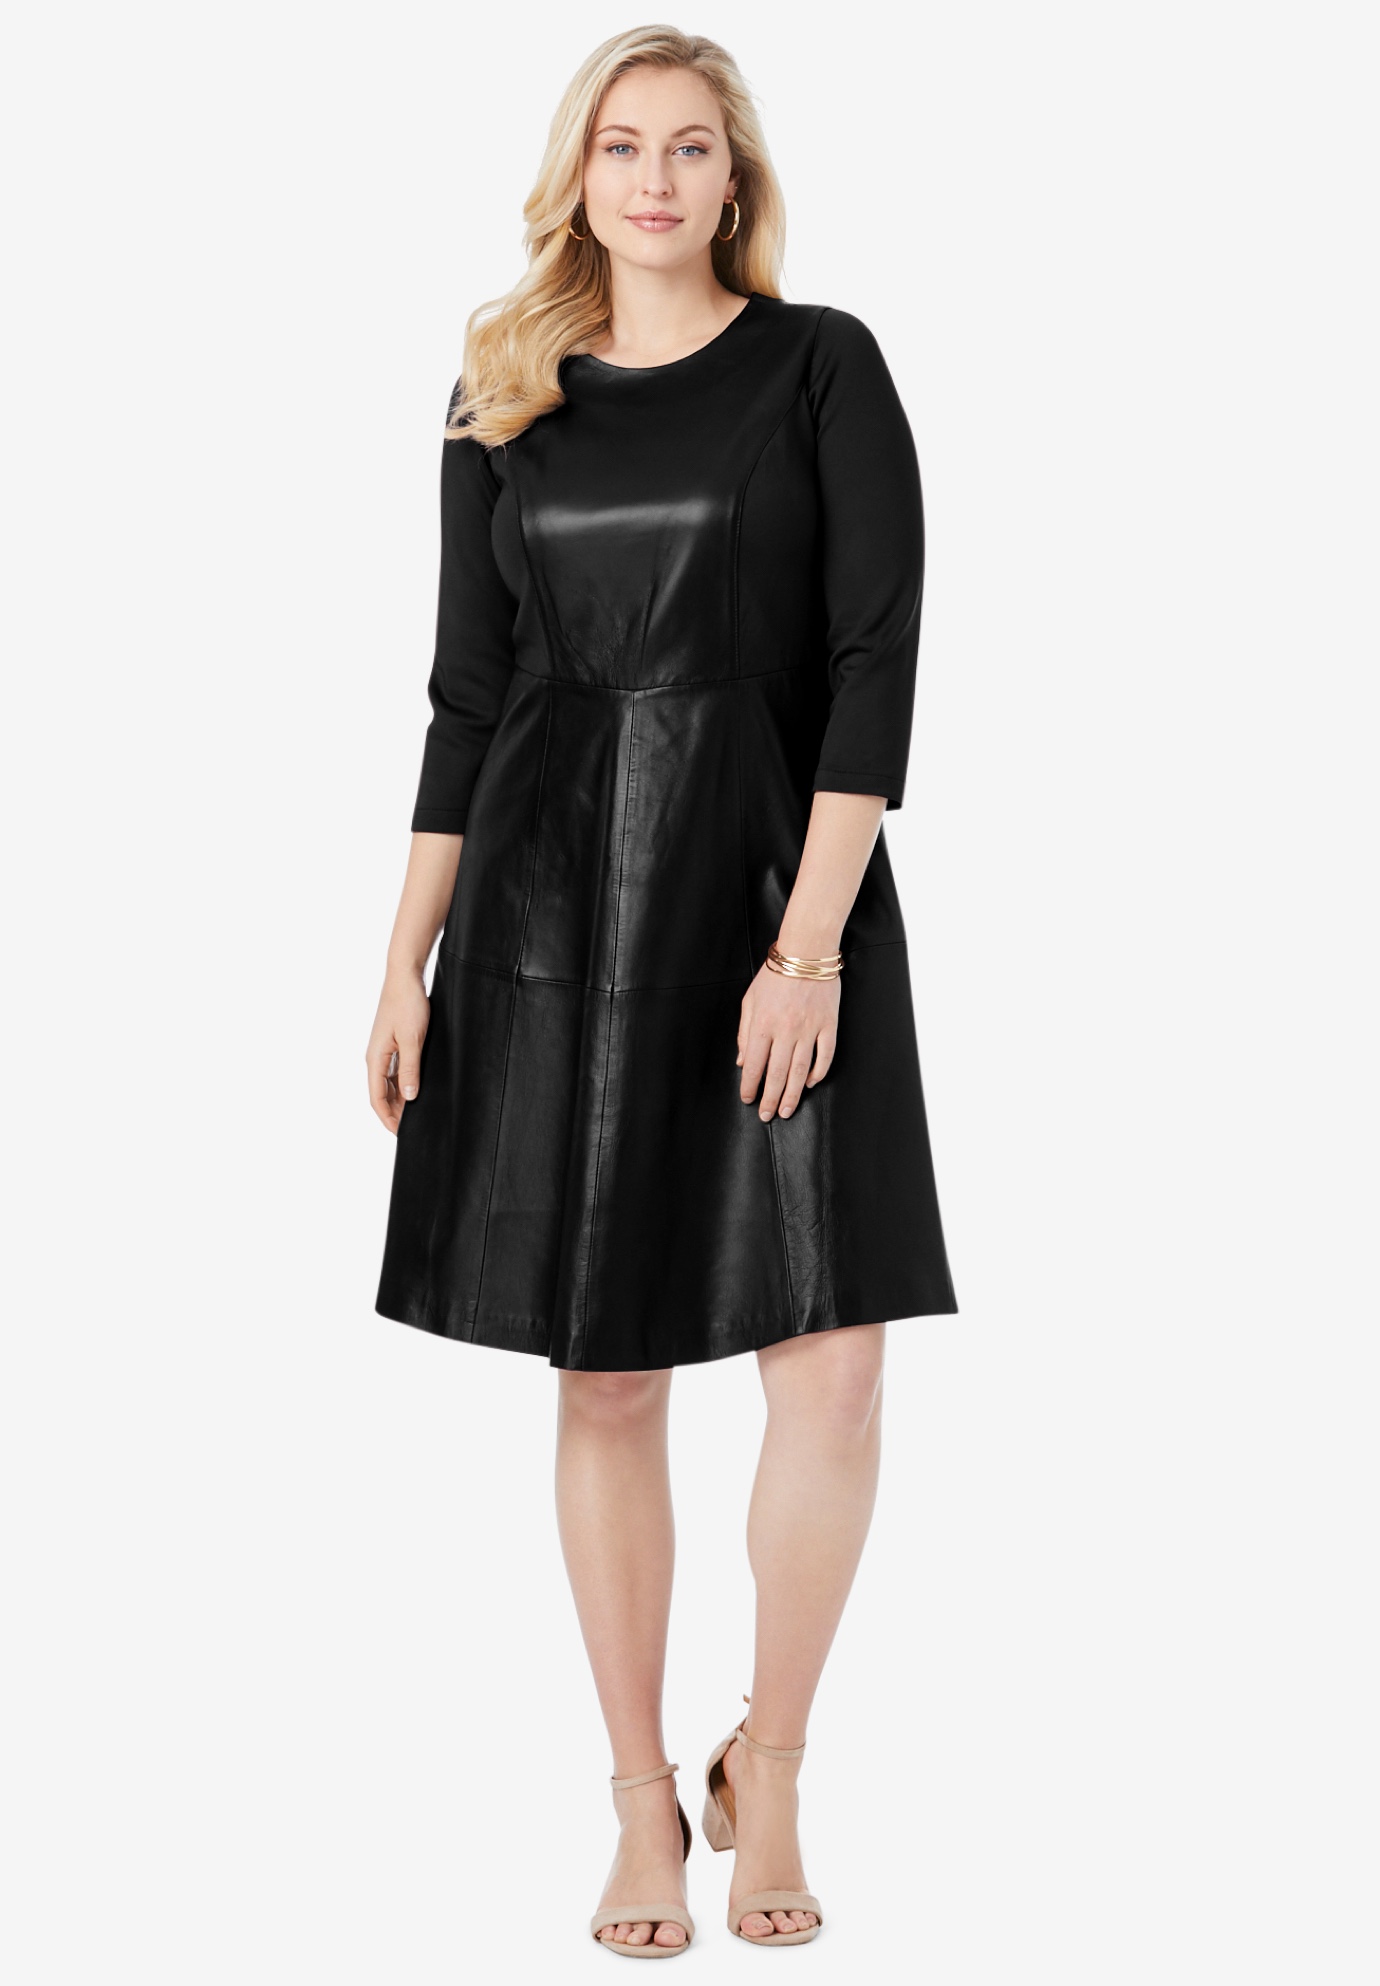 Leather and Ponte Knit Fit & Flare Dress | Roaman's